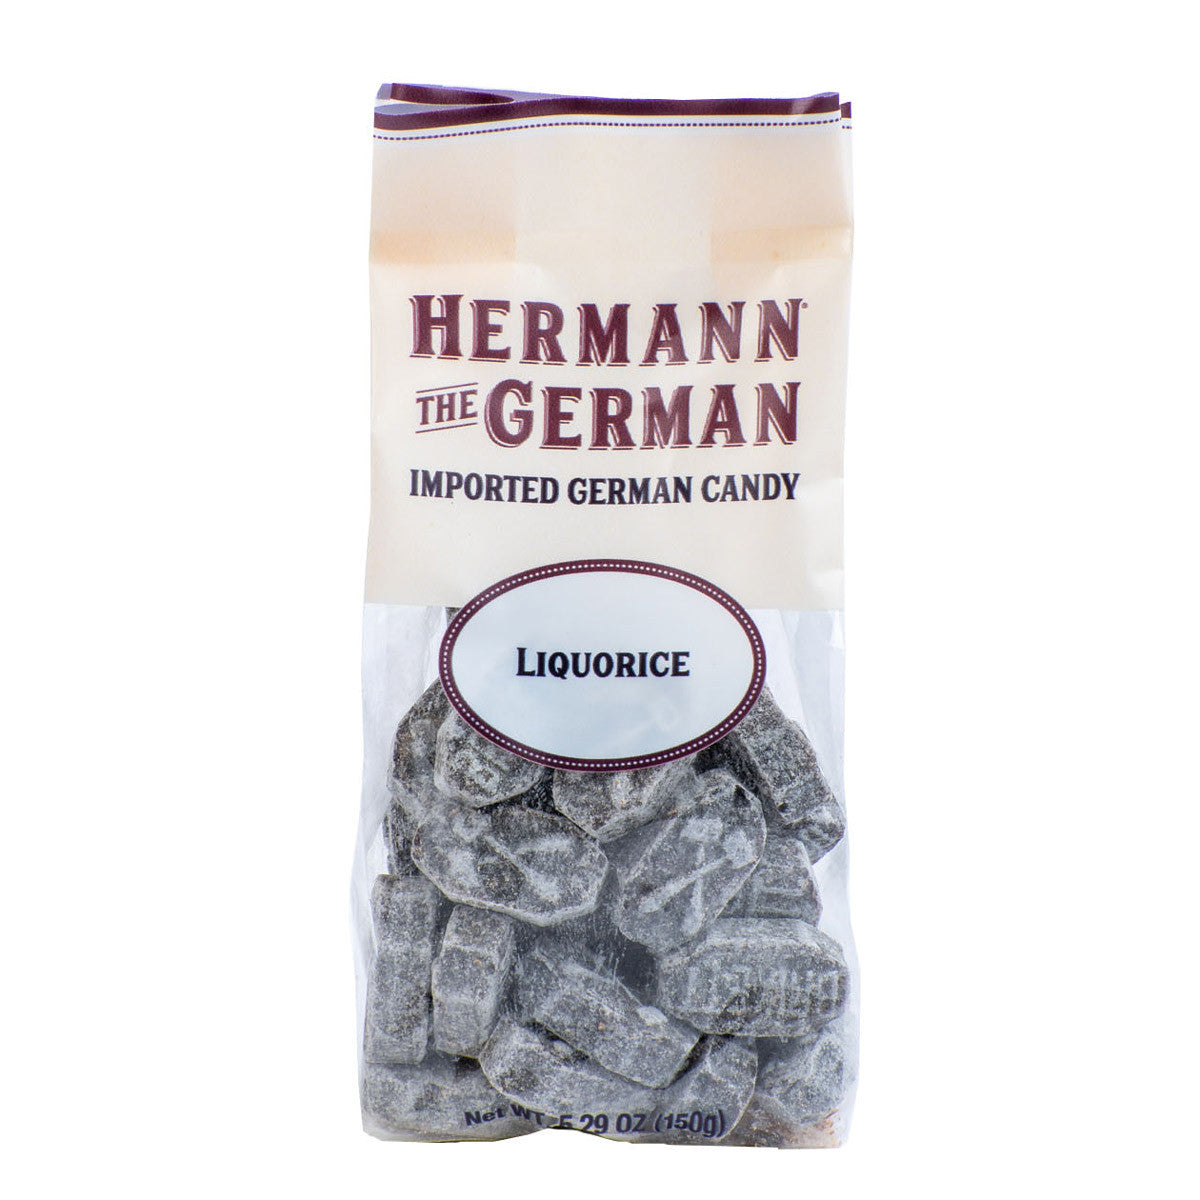 Hermann the German Licorice Candy - German Candy